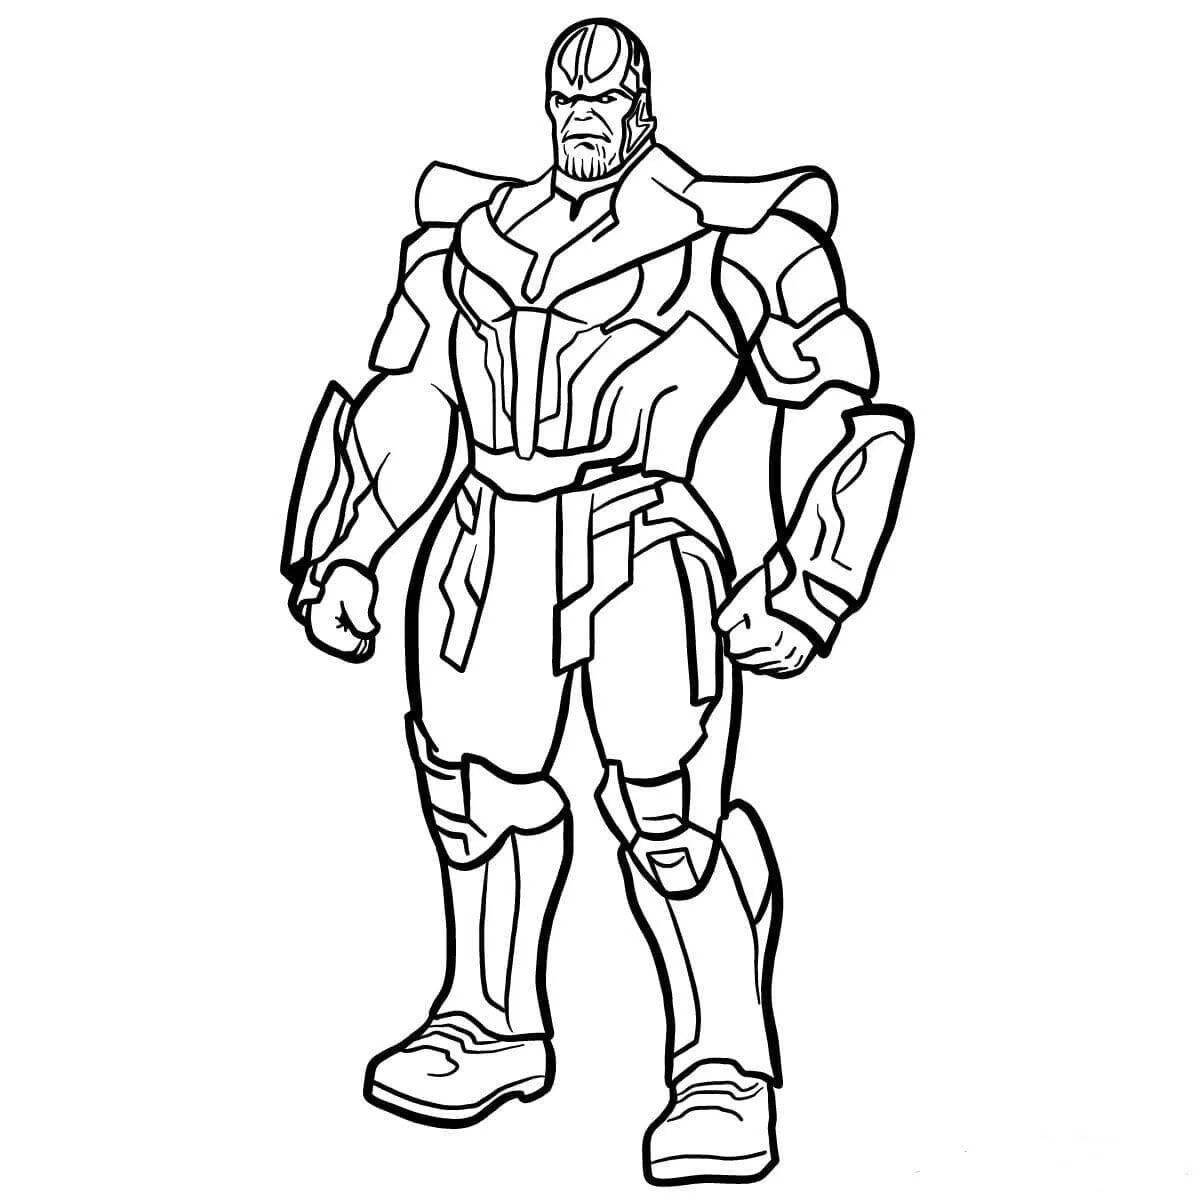 Avengers funny coloring book for boys